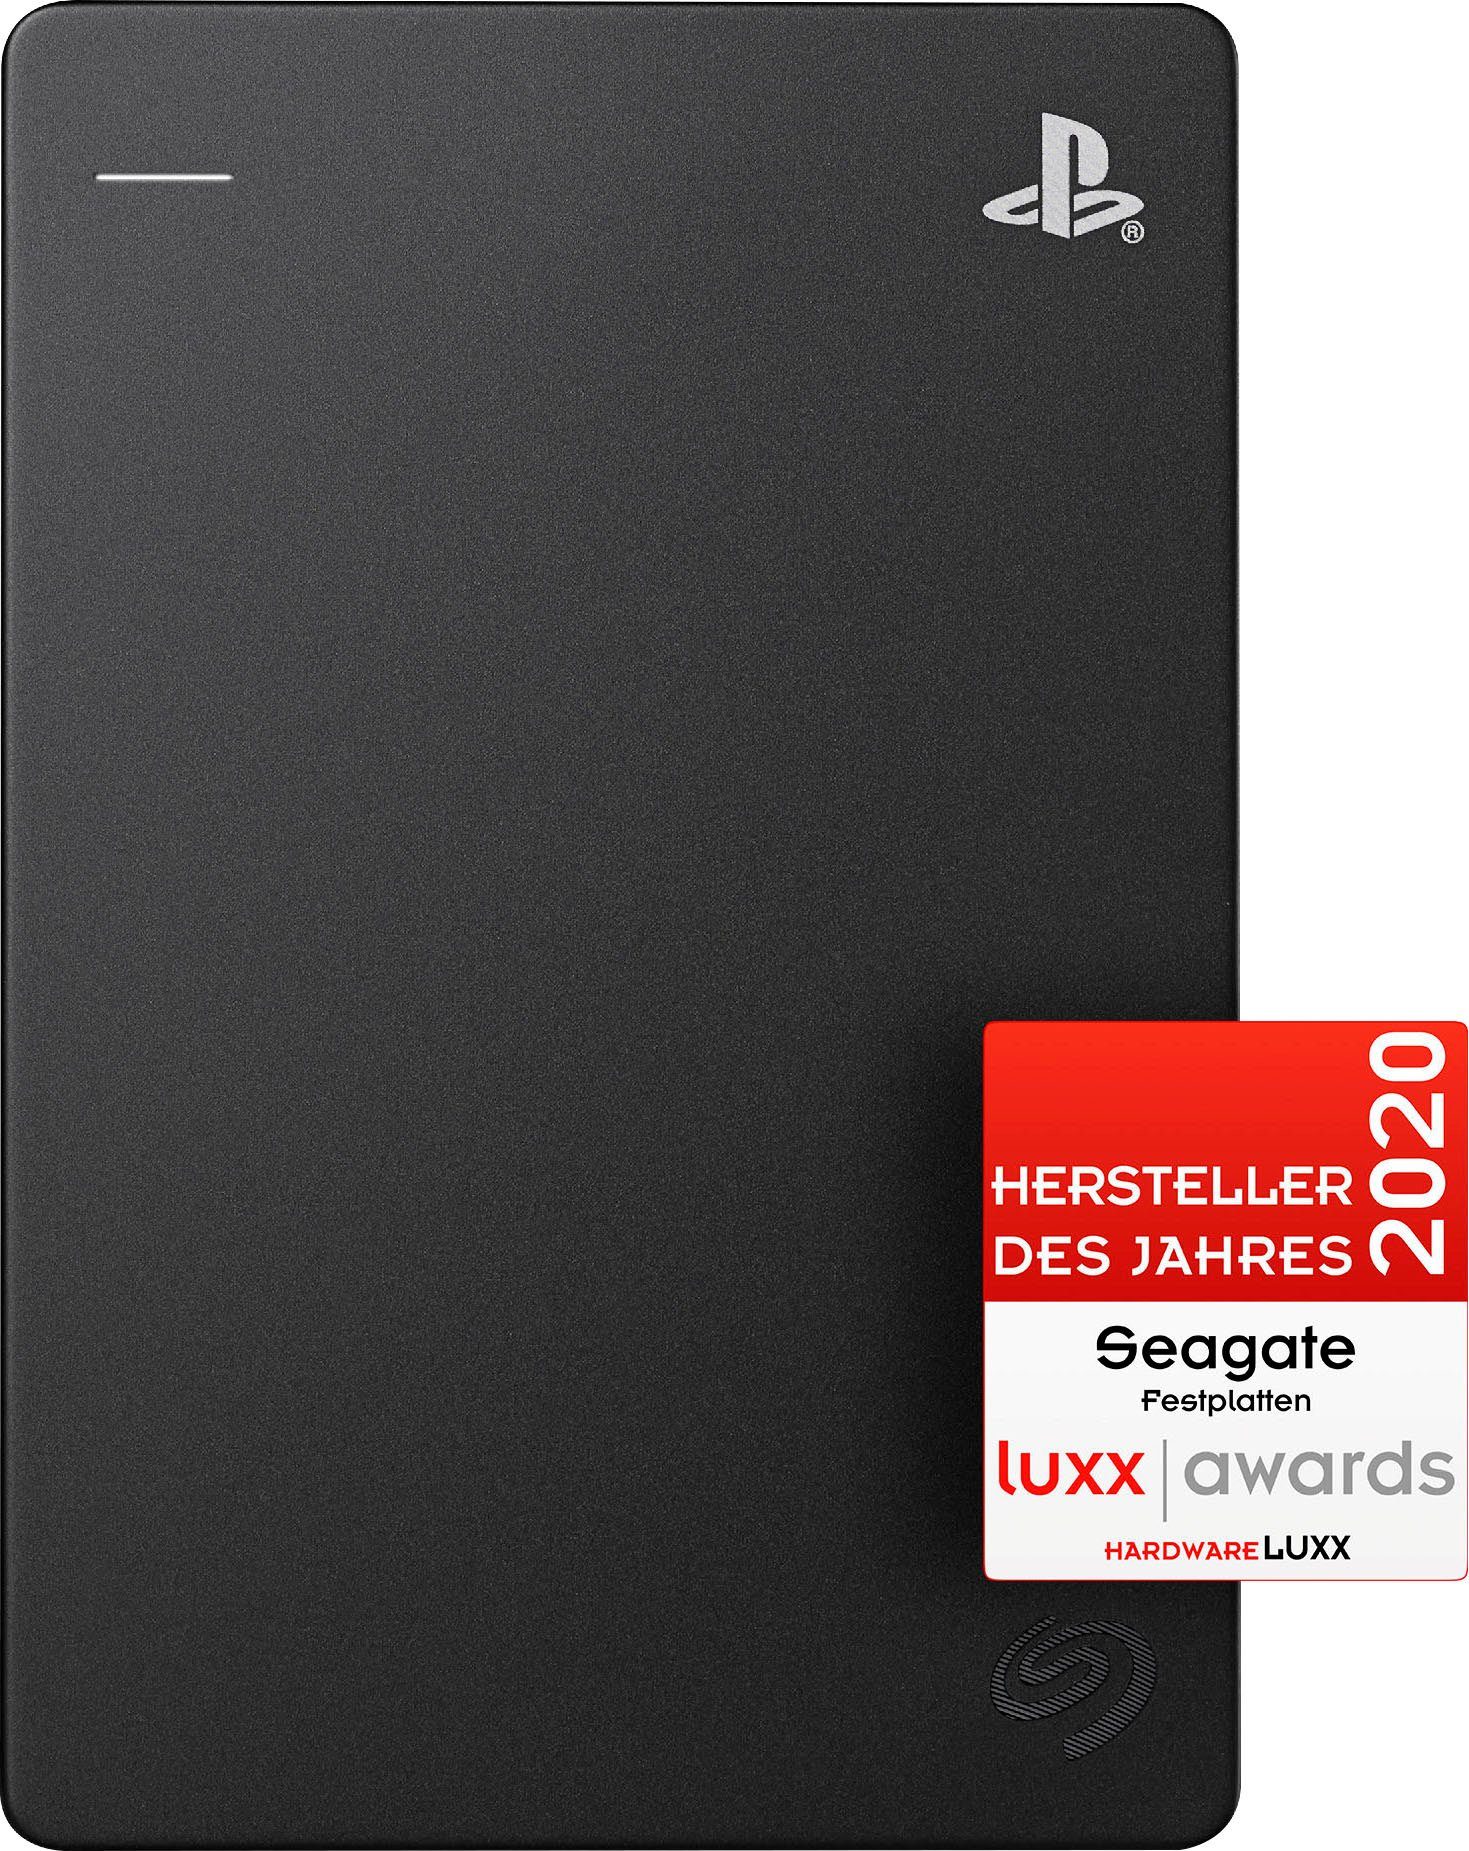 Seagate Game Drive PS4 STGD2000200 externe Gaming-Festplatte (2 TB) 2,5